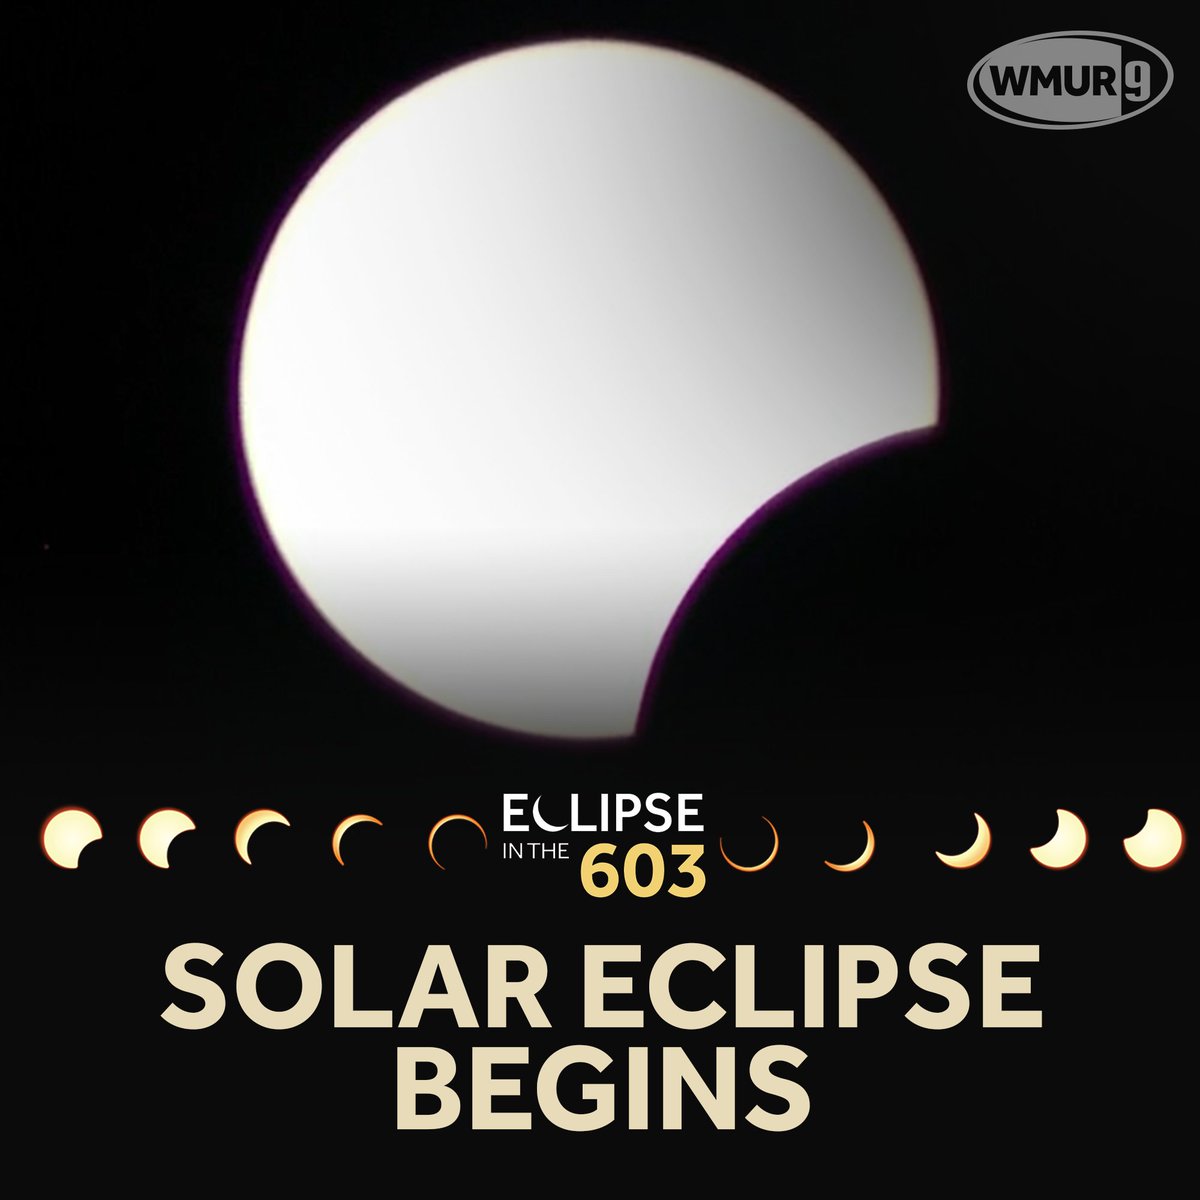 New Hampshire has some of the best skies in the country for today's #eclipse. Watch it live now! wmur.com/article/new-ha…